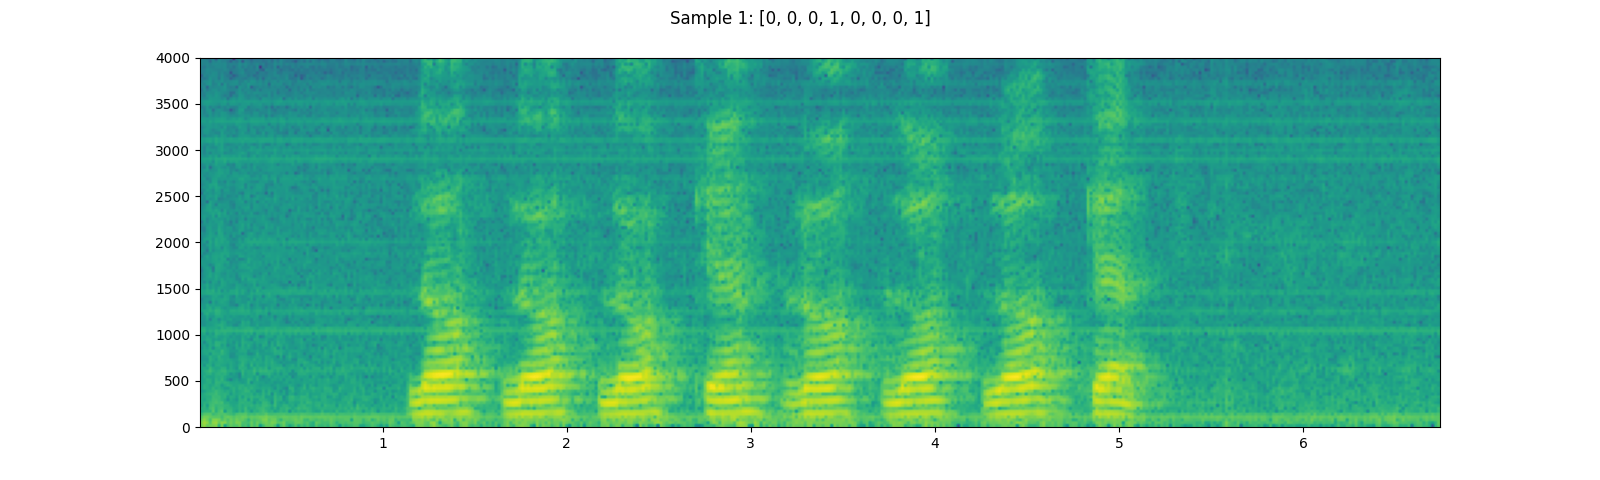 ../_images/sphx_glr_audio_preprocessing_tutorial_065.png